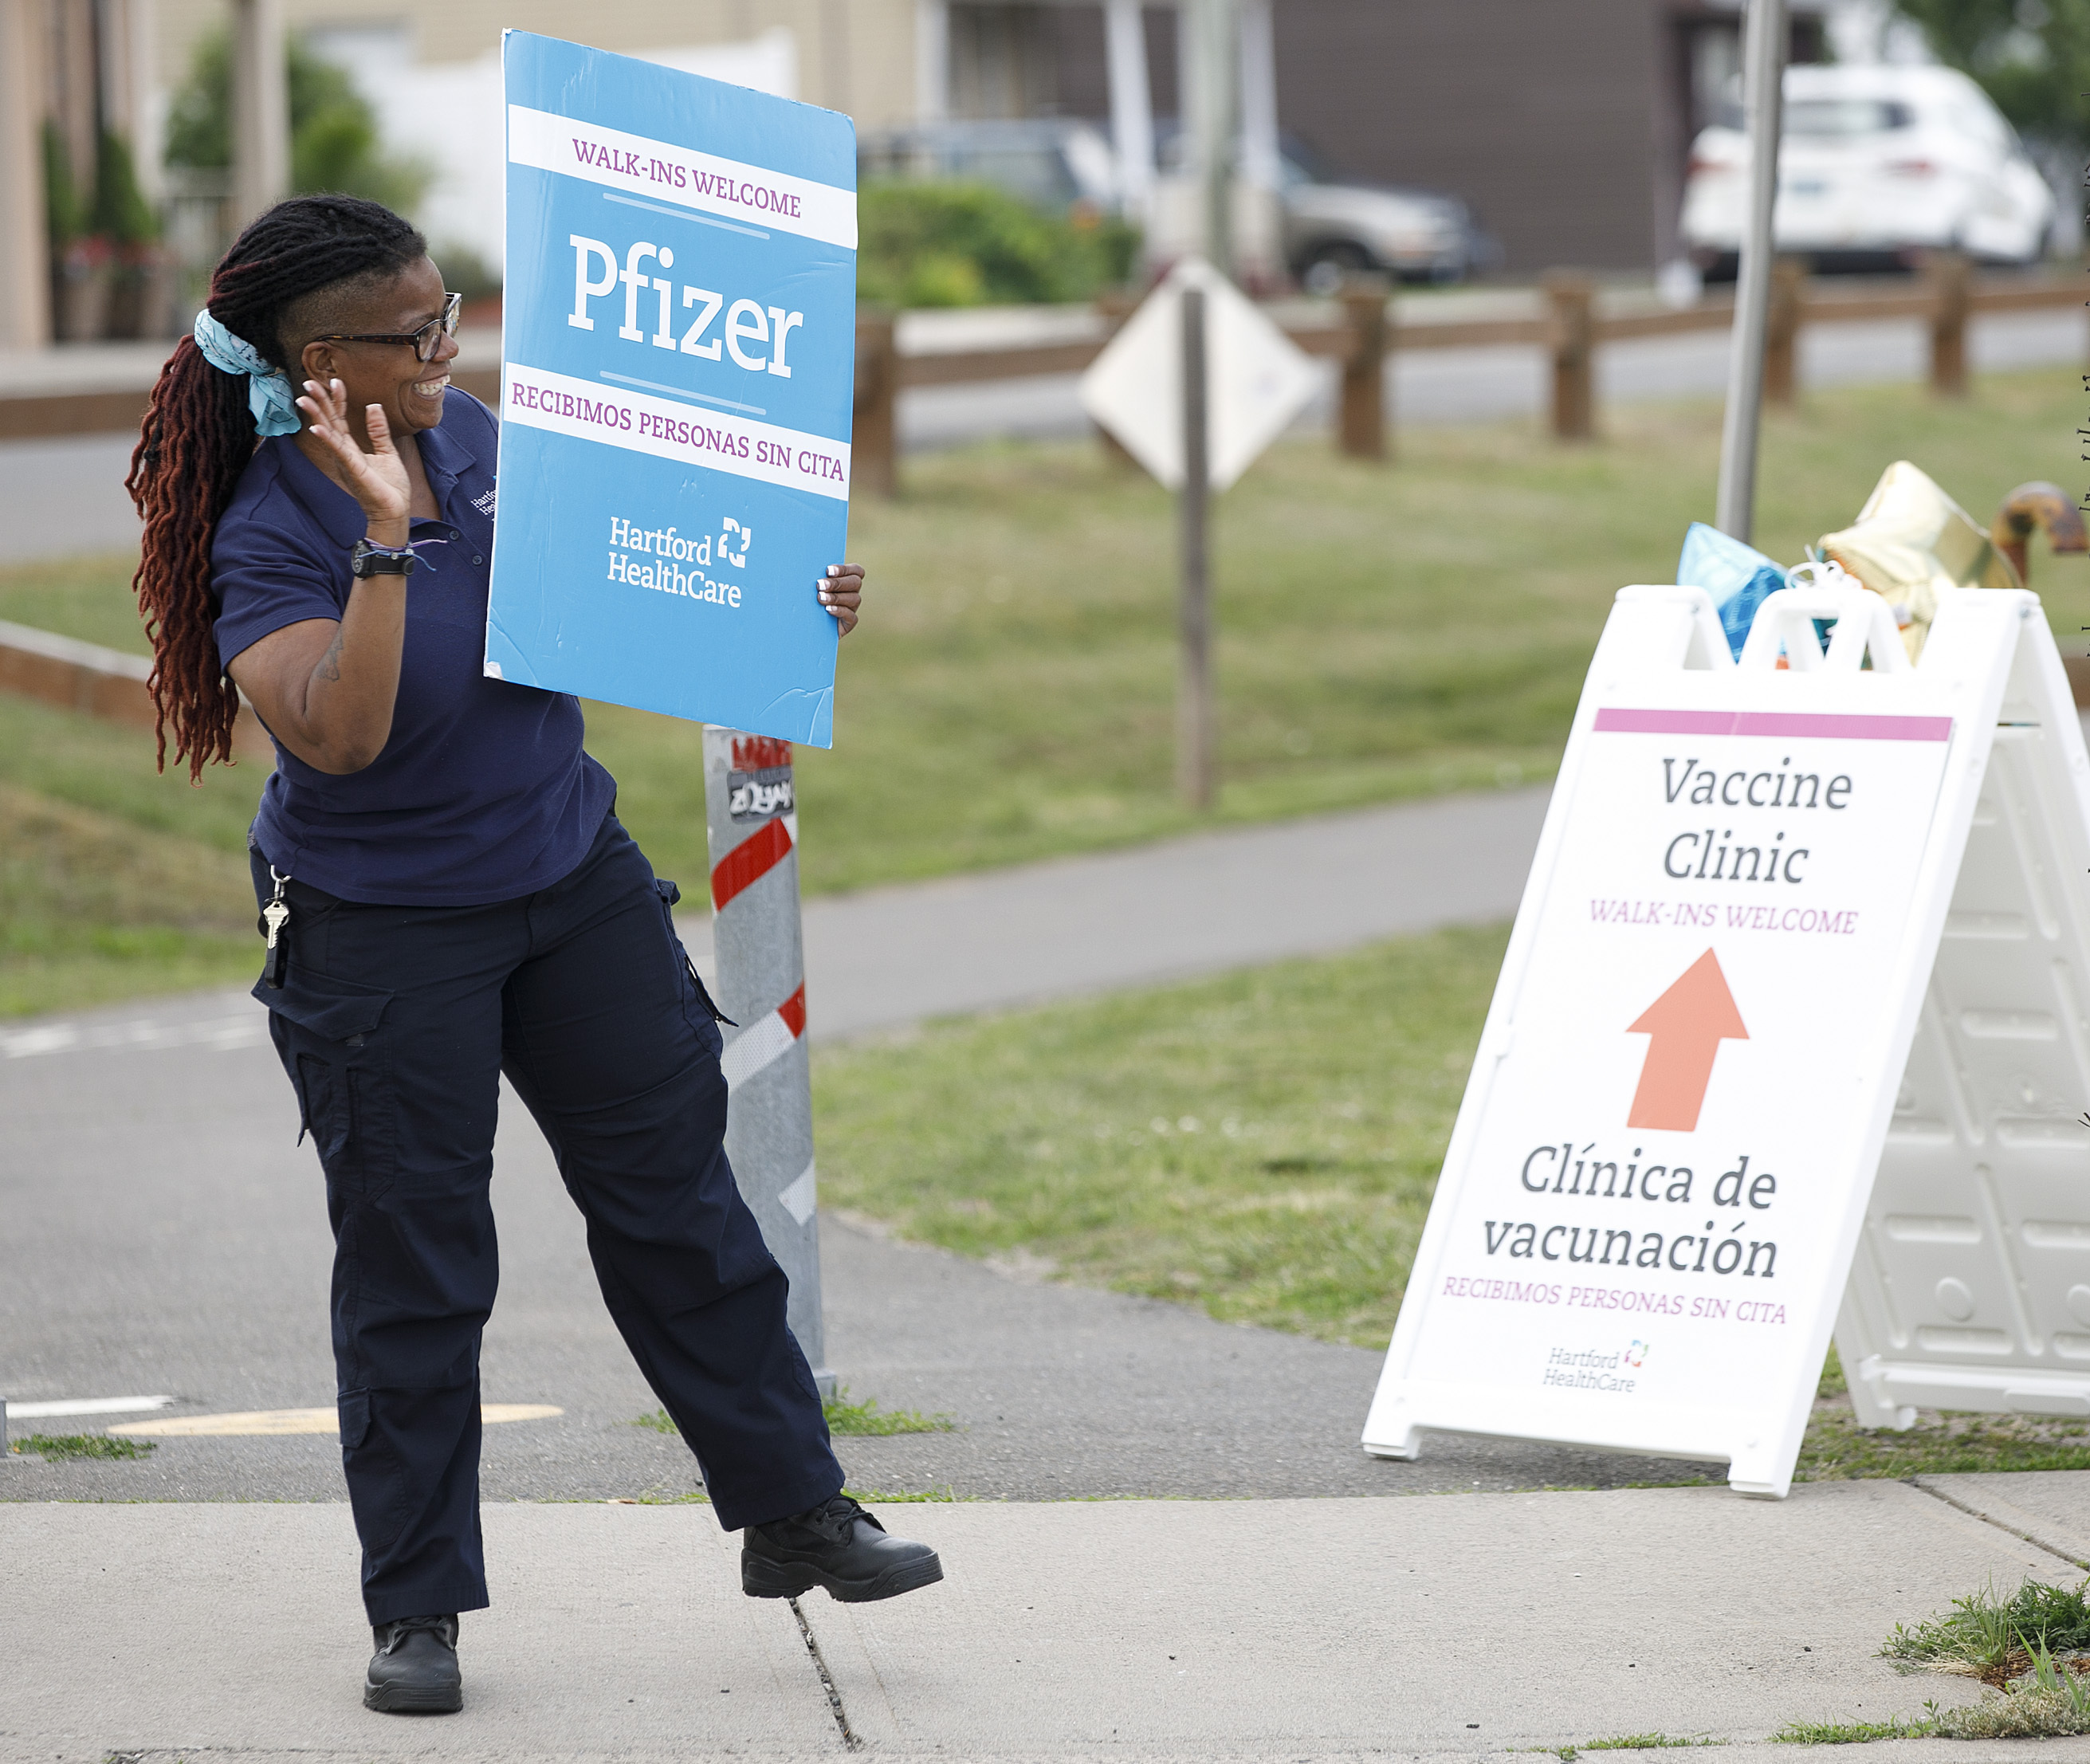 Roslyn Williams, an EMT vaccinator for Hartford HealthCare, holds a Pfizer sign for a COVID-19 vaccination event at Smokin' With Chris in Southington, Conn., Monday, June 21, 2021.